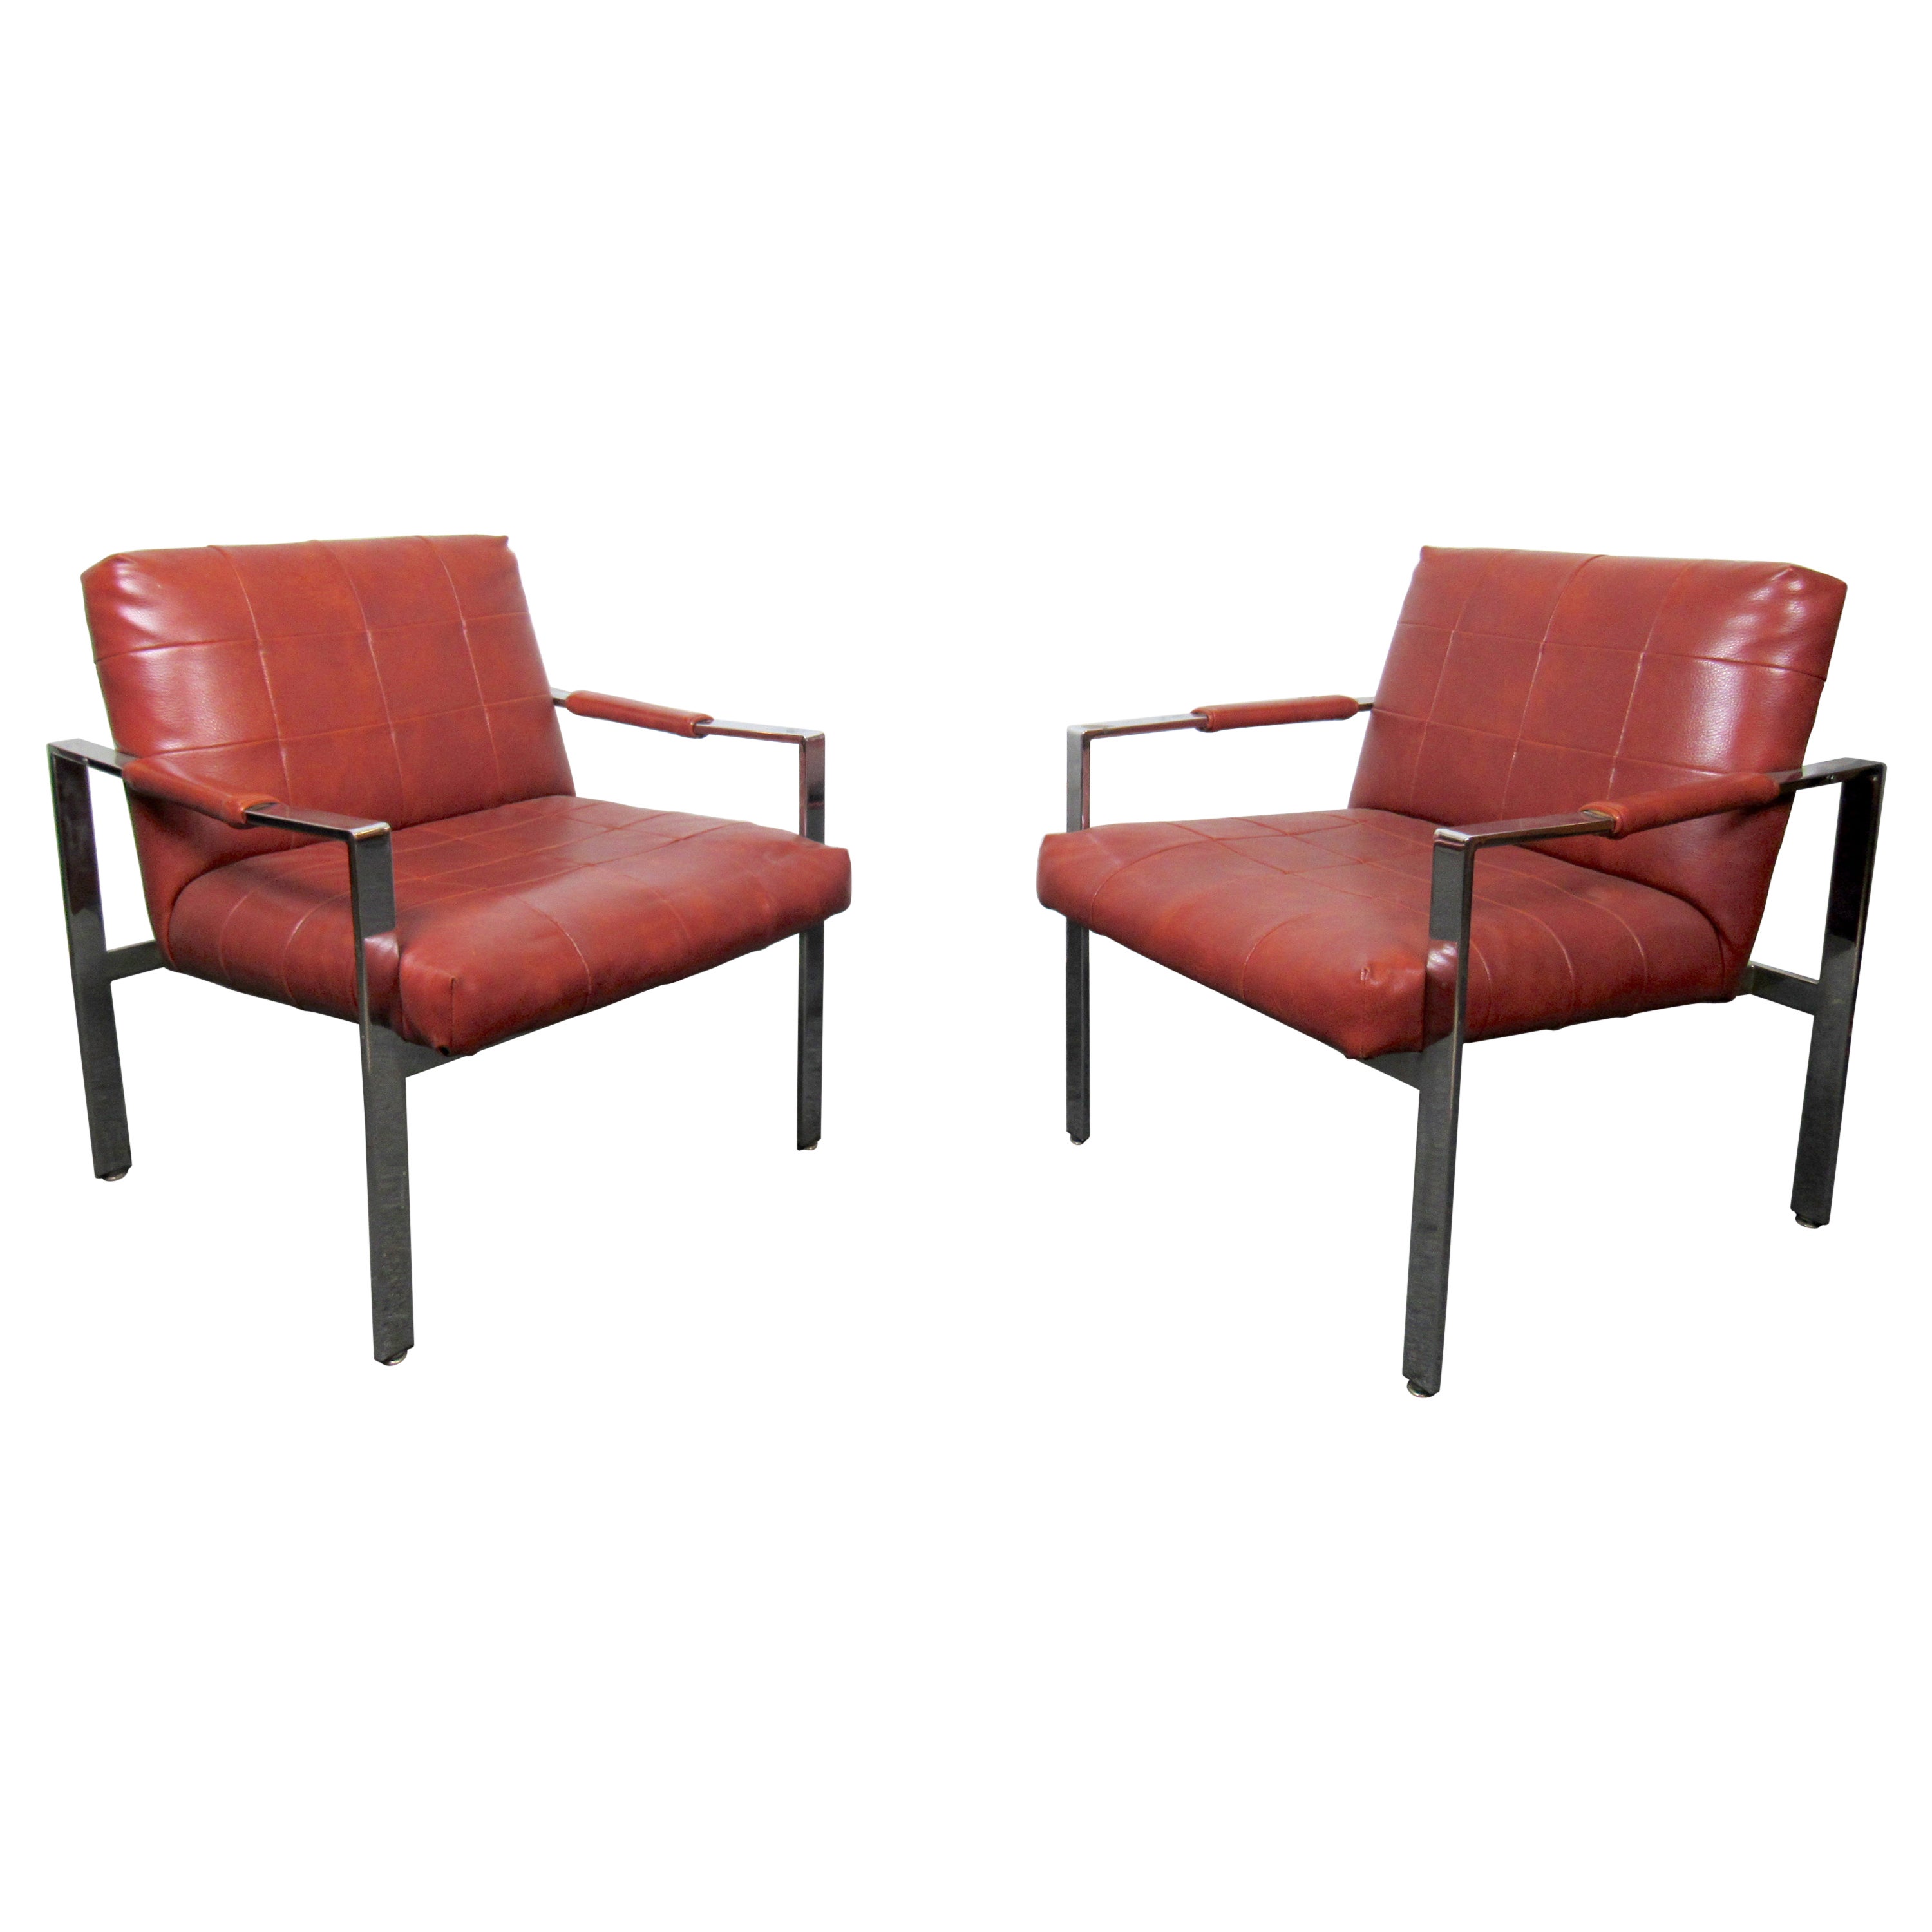 Pair of Leather & Chrome Armchairs by Milo Baughman for Thayer Coggin For Sale